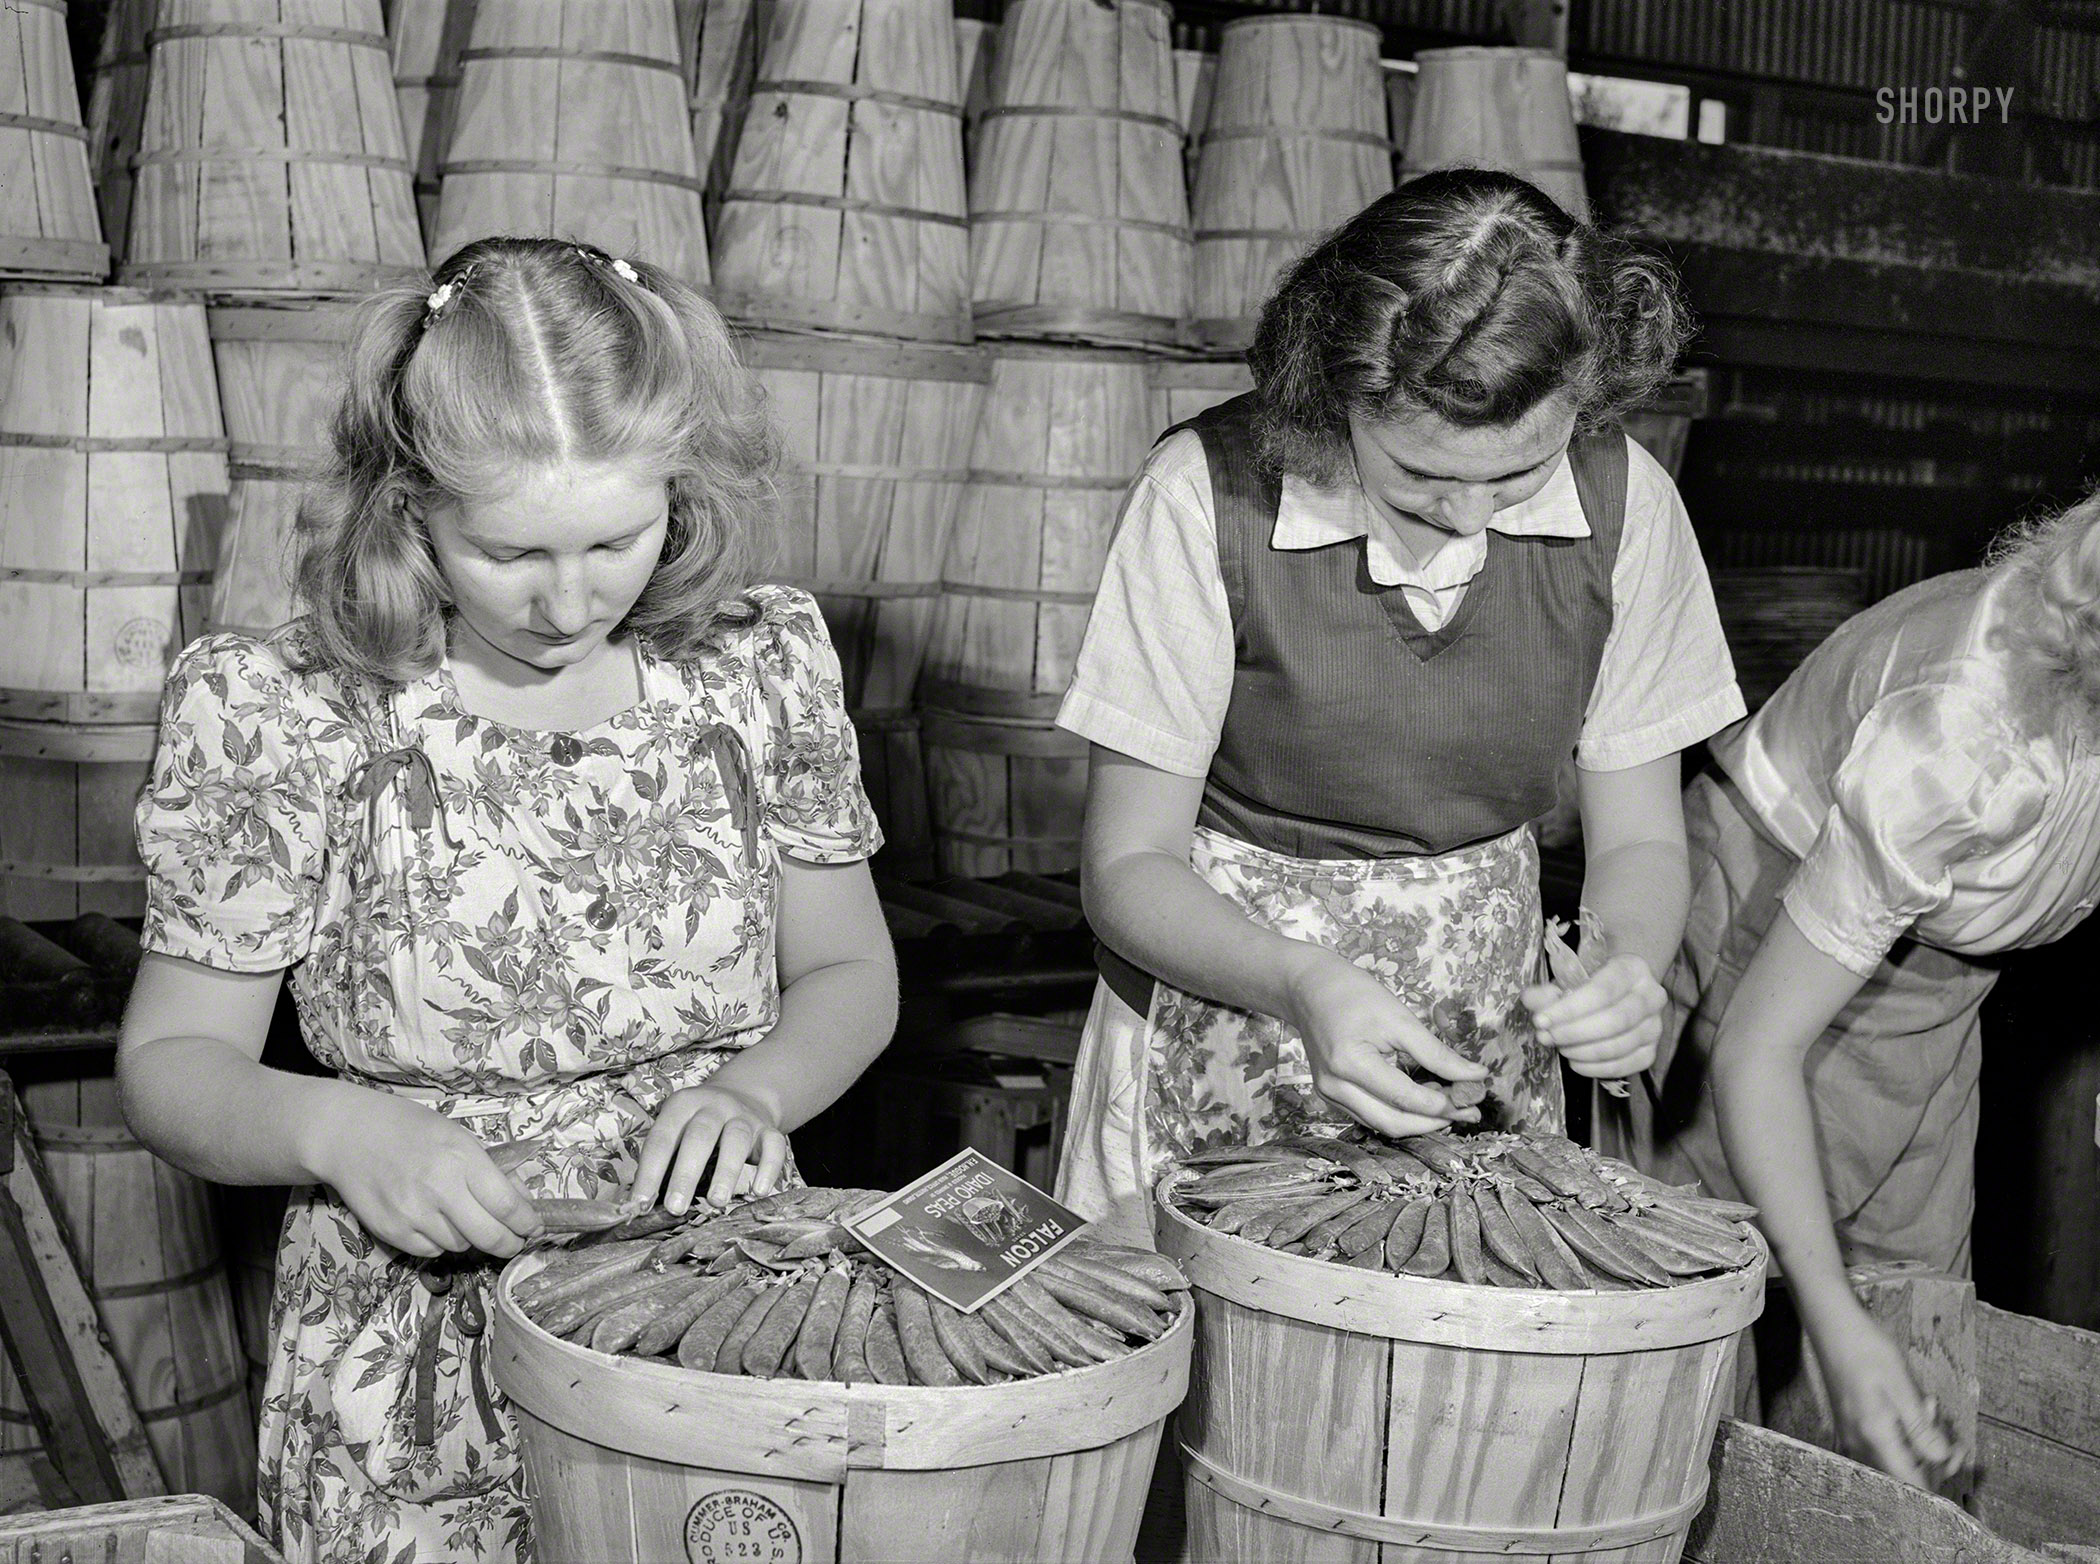 June 1941. "Dressing crates of peas for shipment. Canyon County, Idaho." Acetate negative by Russell Lee for the Farm Security Administration. View full size.
